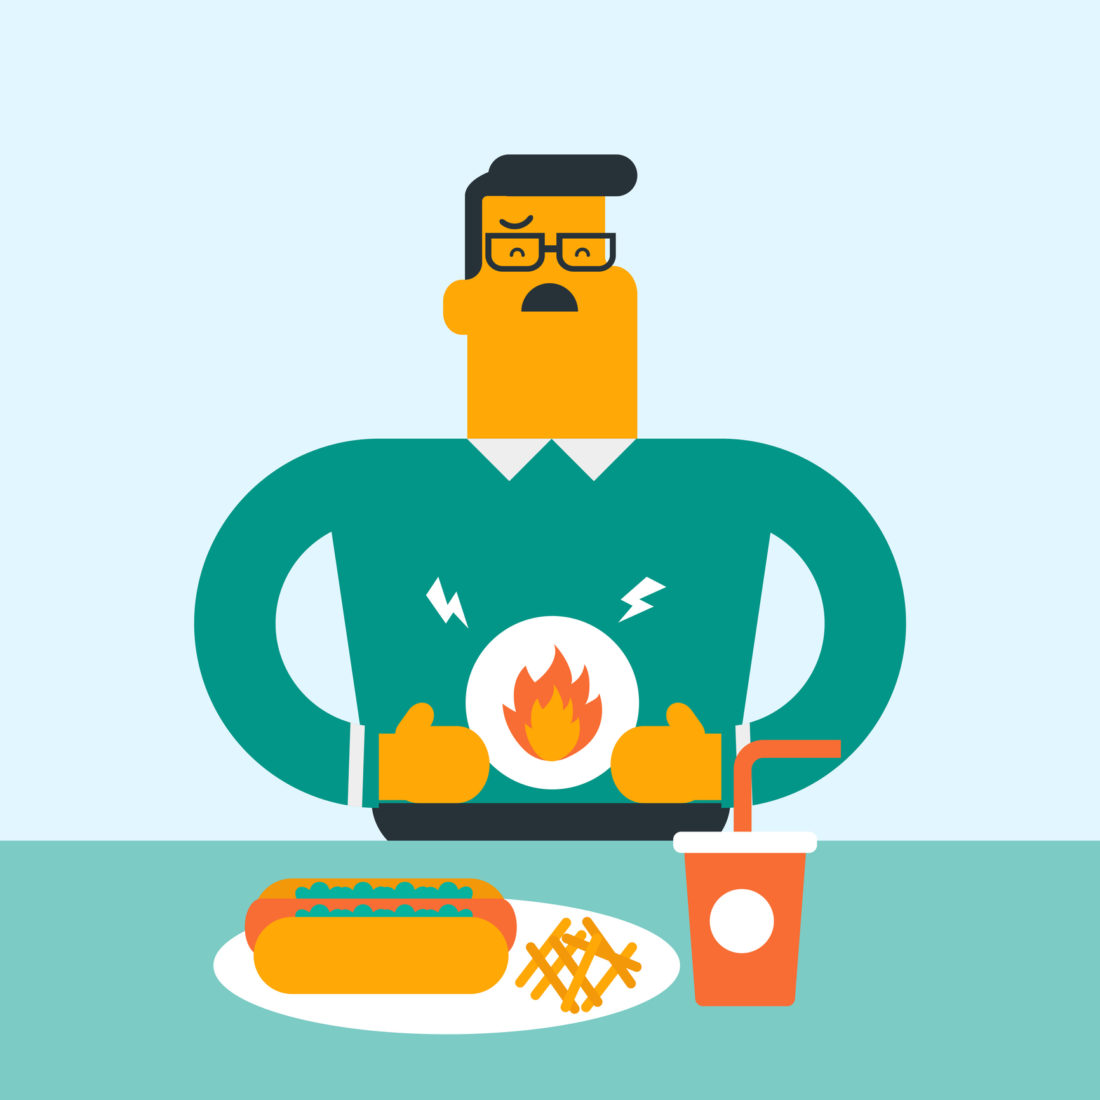 An illustration of a man experiencing heartburn